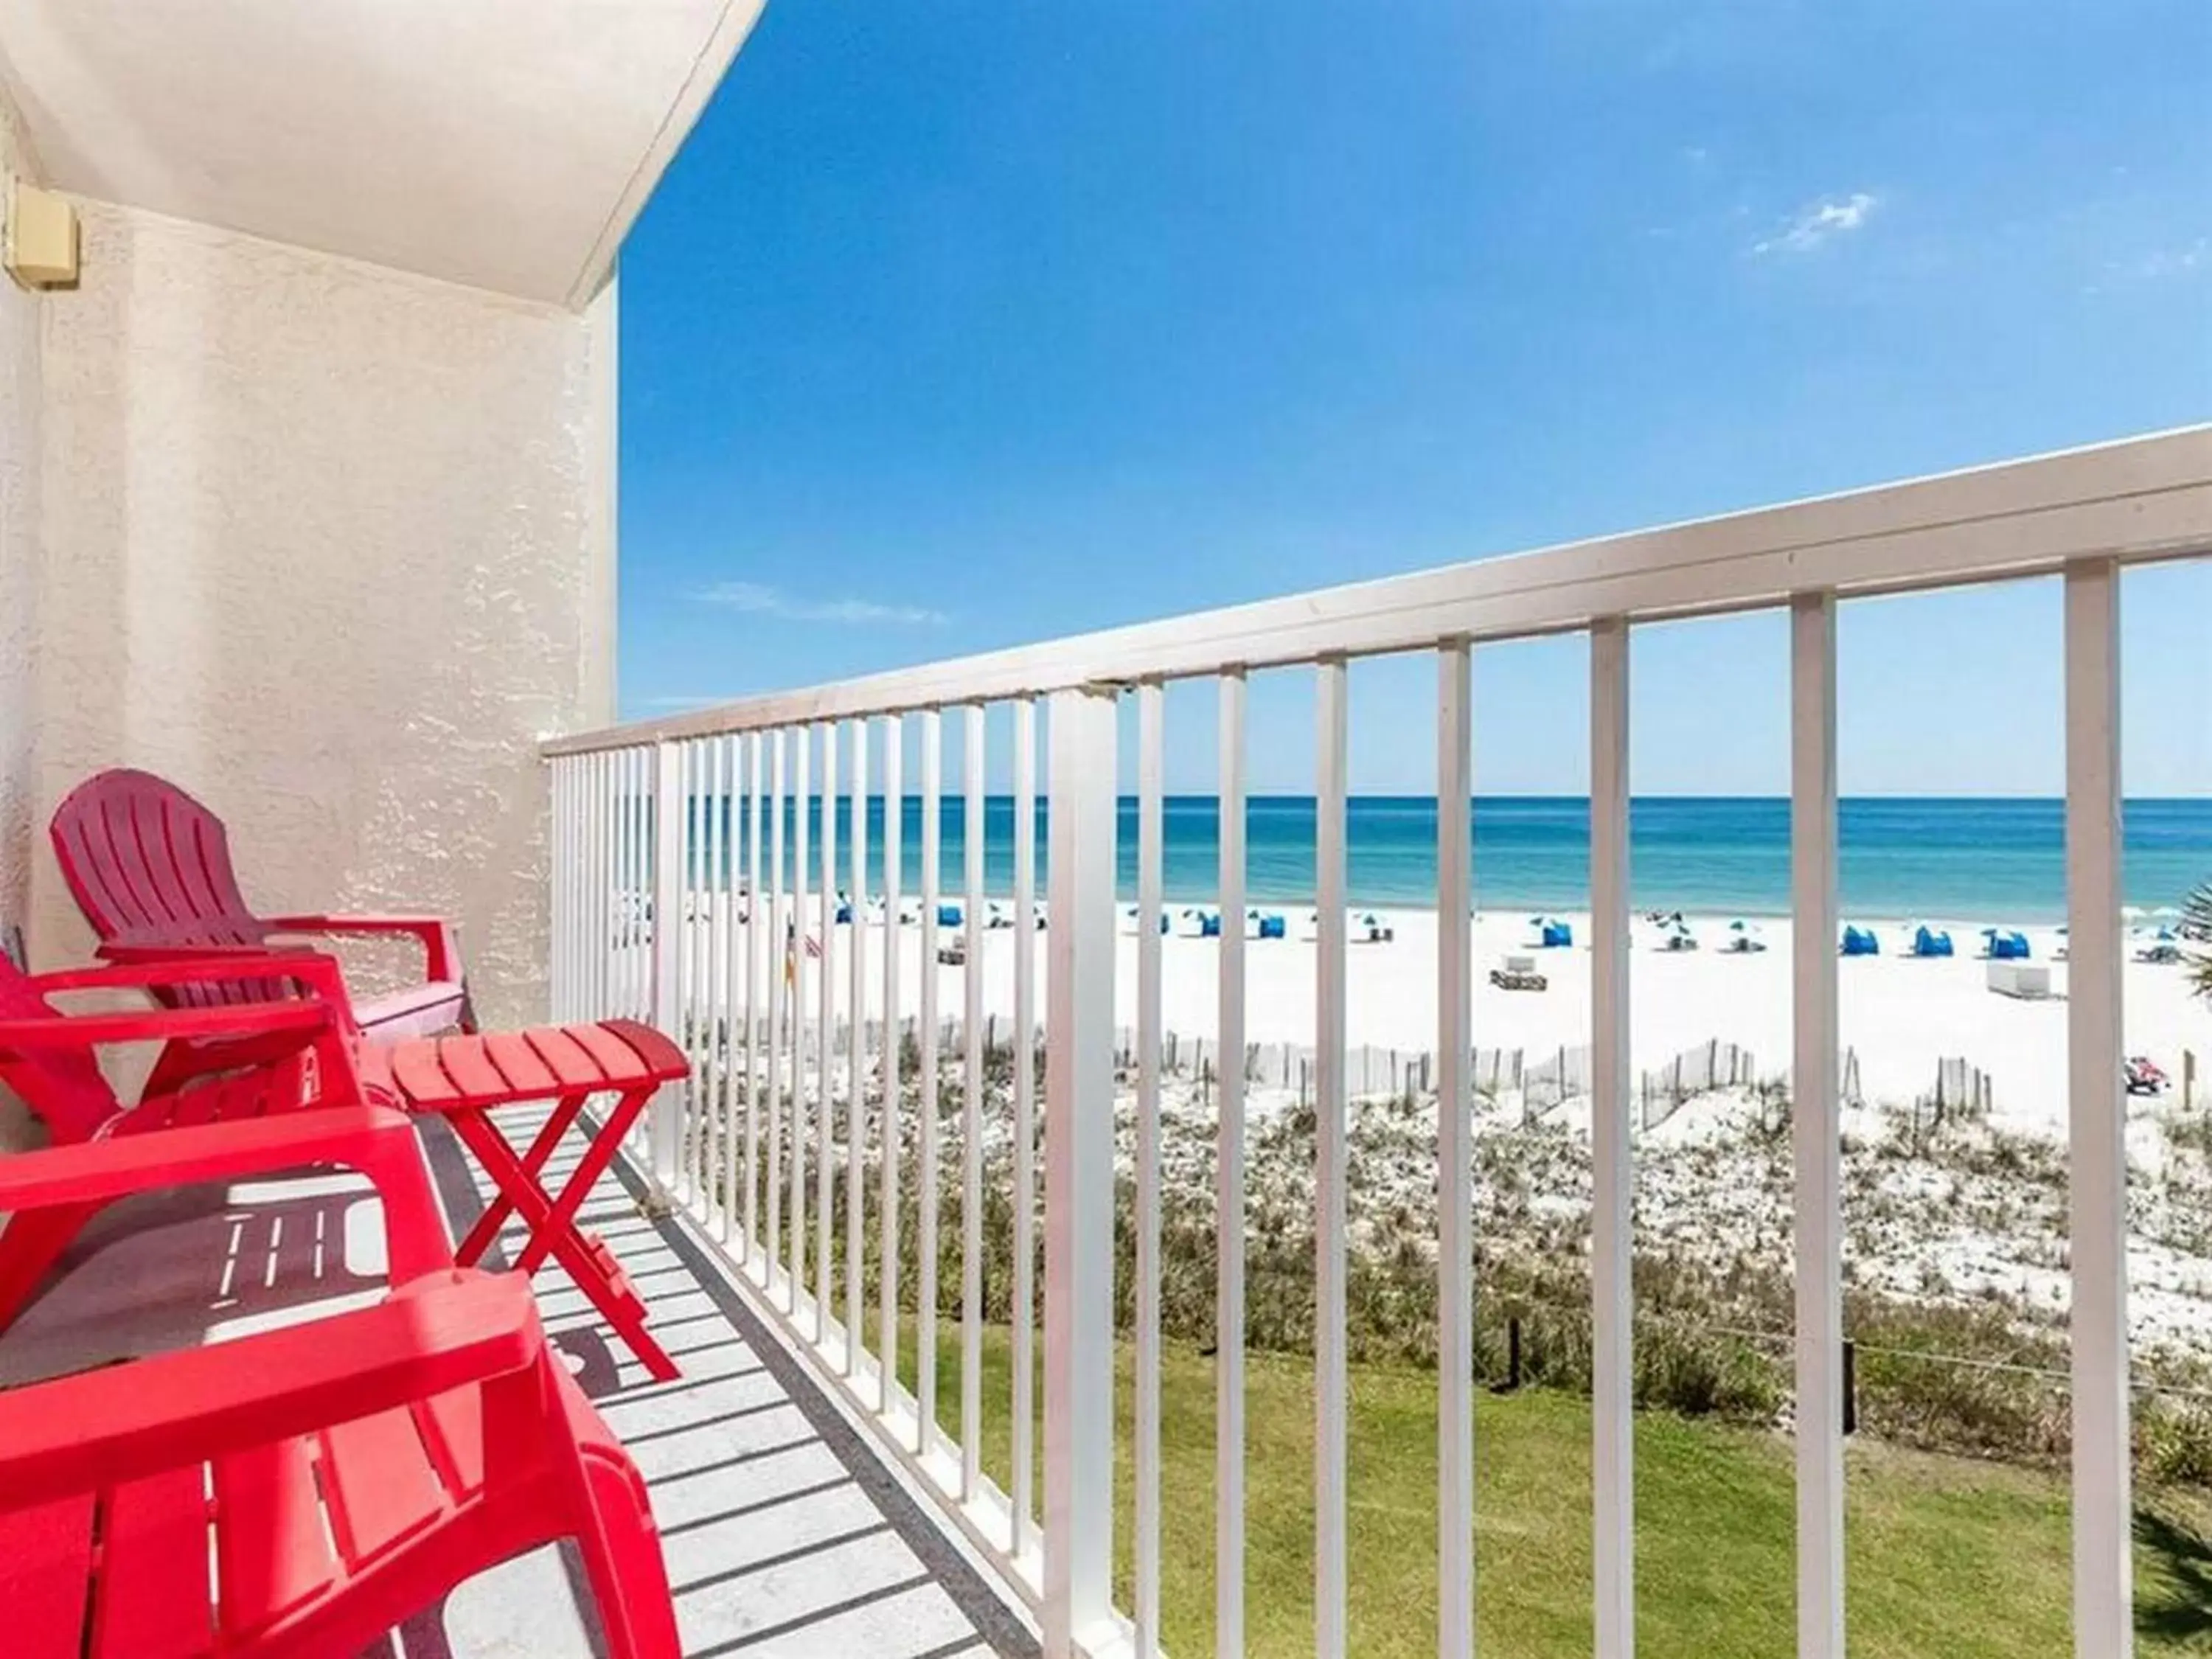 One-Bedroom Apartment in Seaside Beach and Racquet Club Condos II